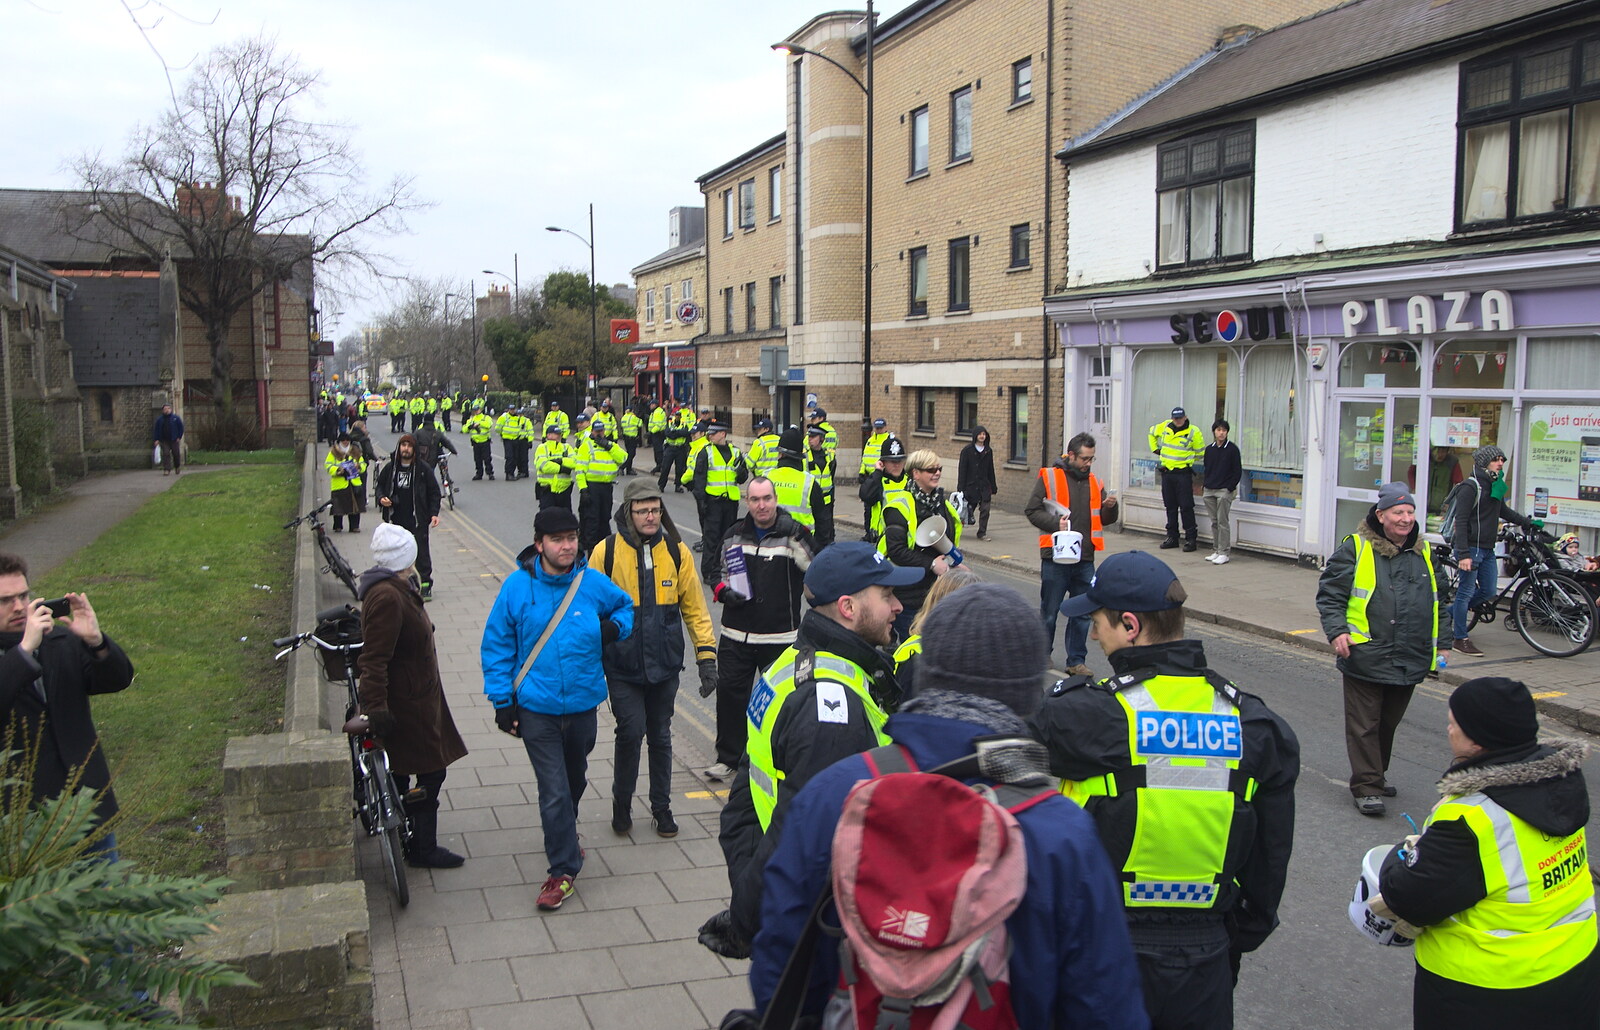 Police a spread out up Mill Road from An Anti-Fascist March, Mill Road, Cambridge - 23rd February 2013